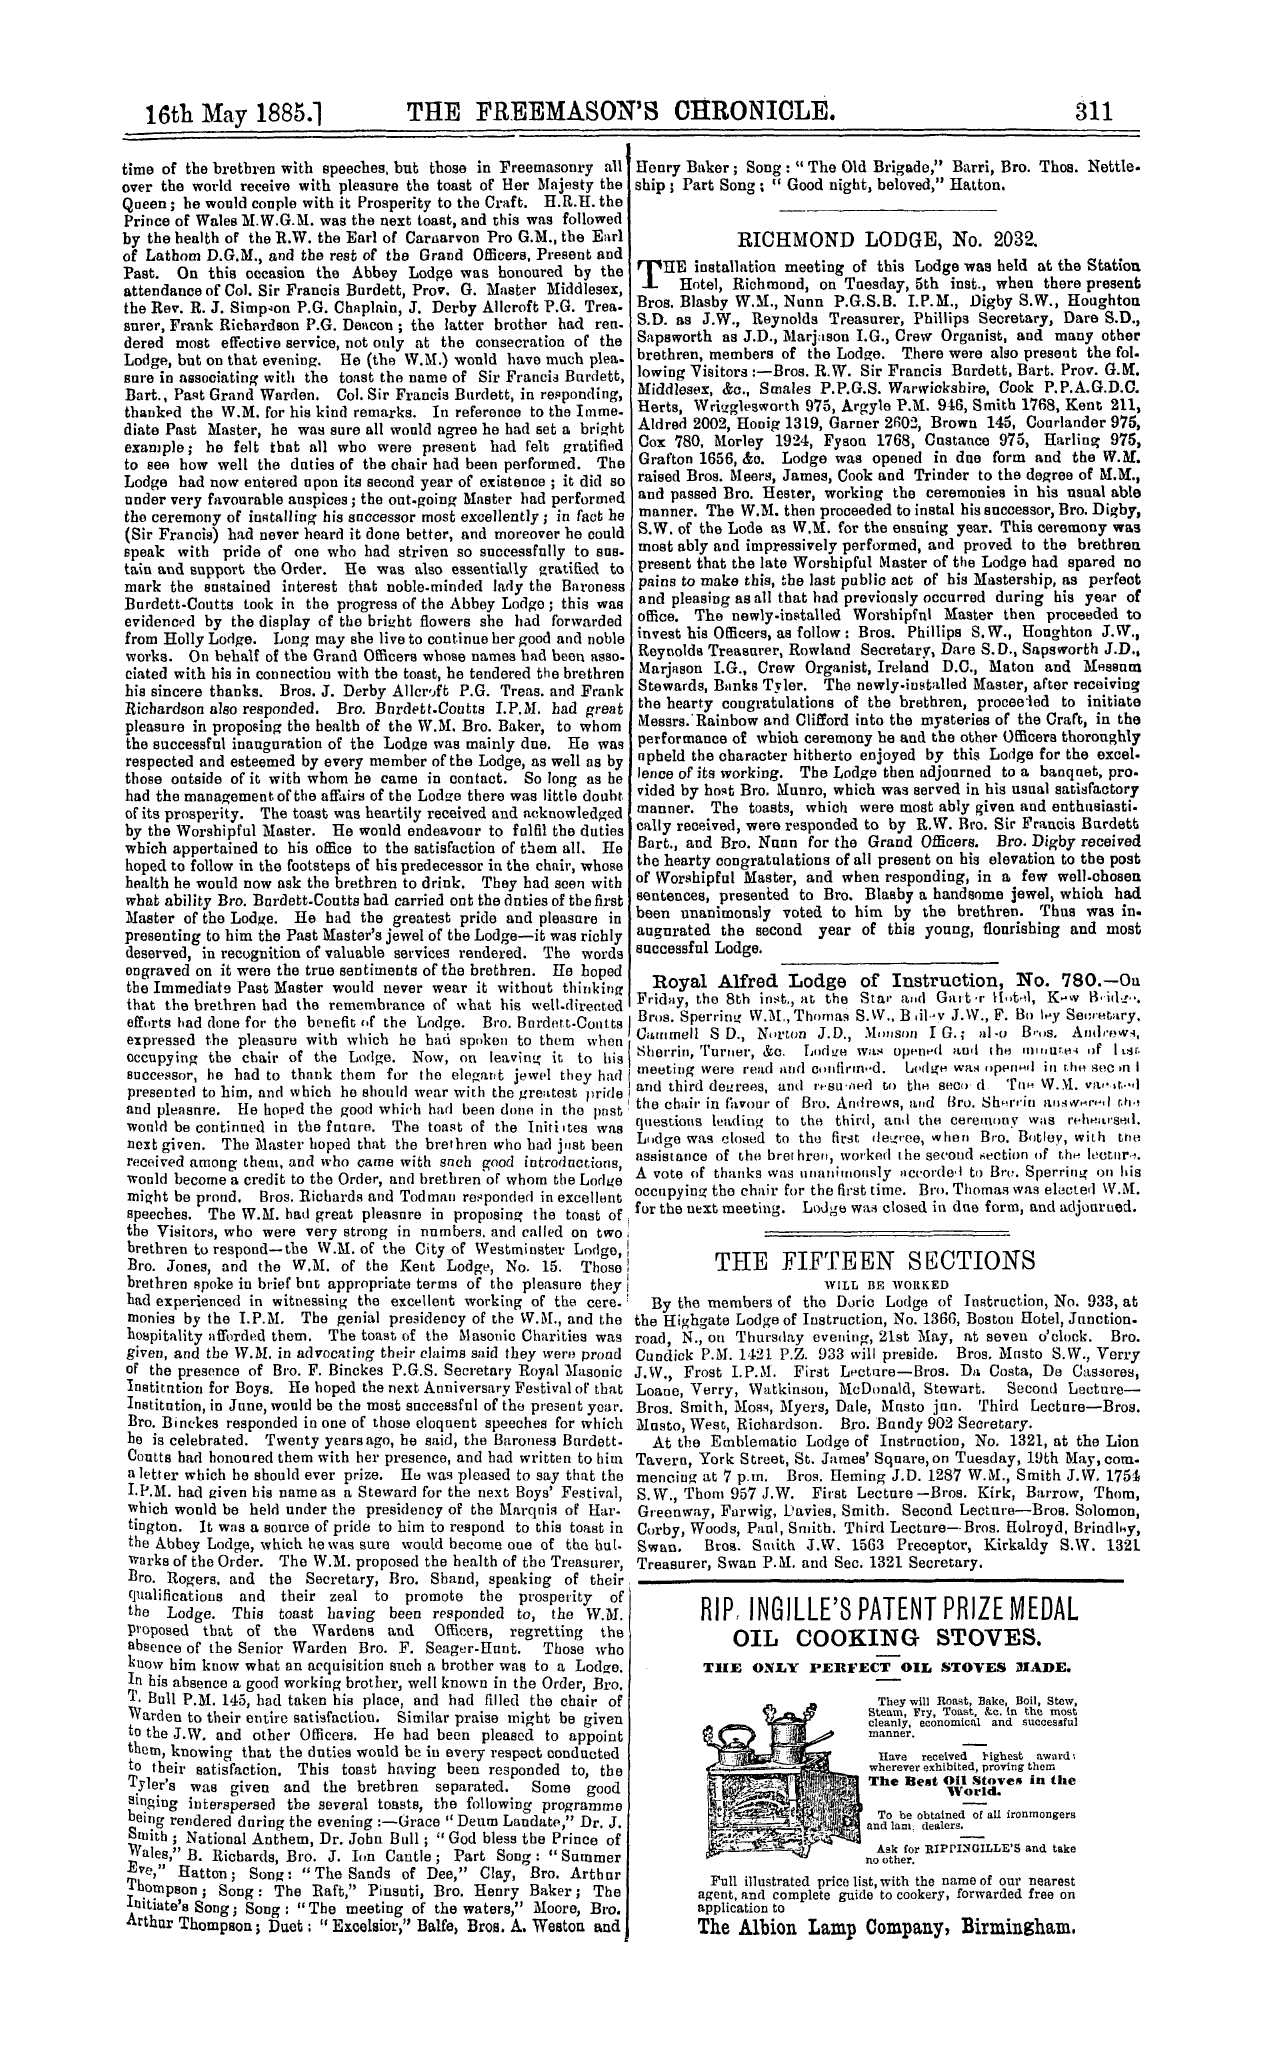 The Freemason's Chronicle: 1885-05-16 - The Fifteen Sections